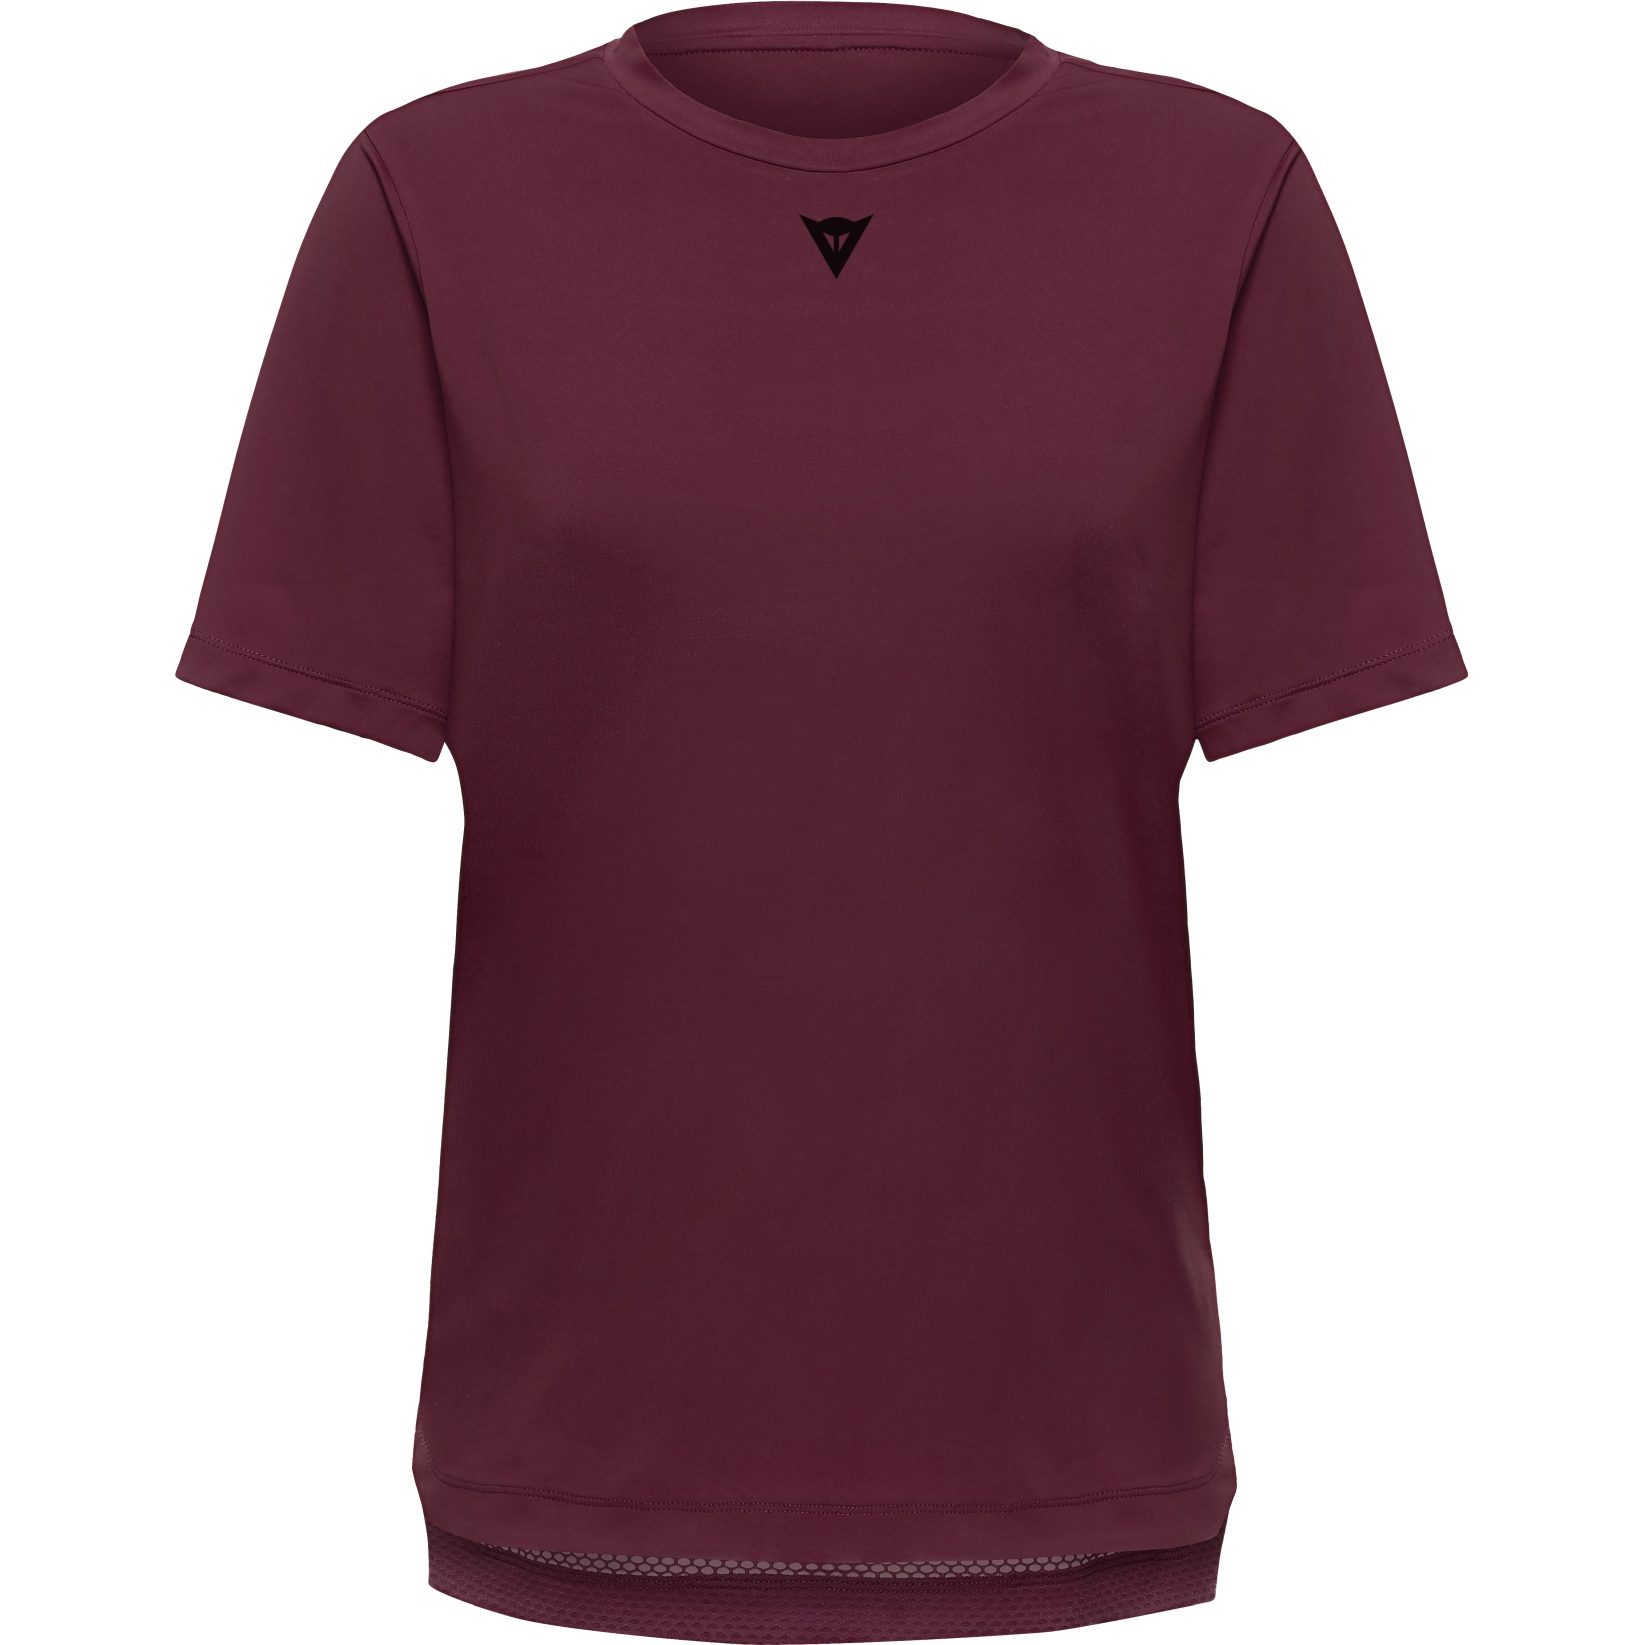 Picture of Dainese HgROX Short Sleeve Jersey Women - windsor wine